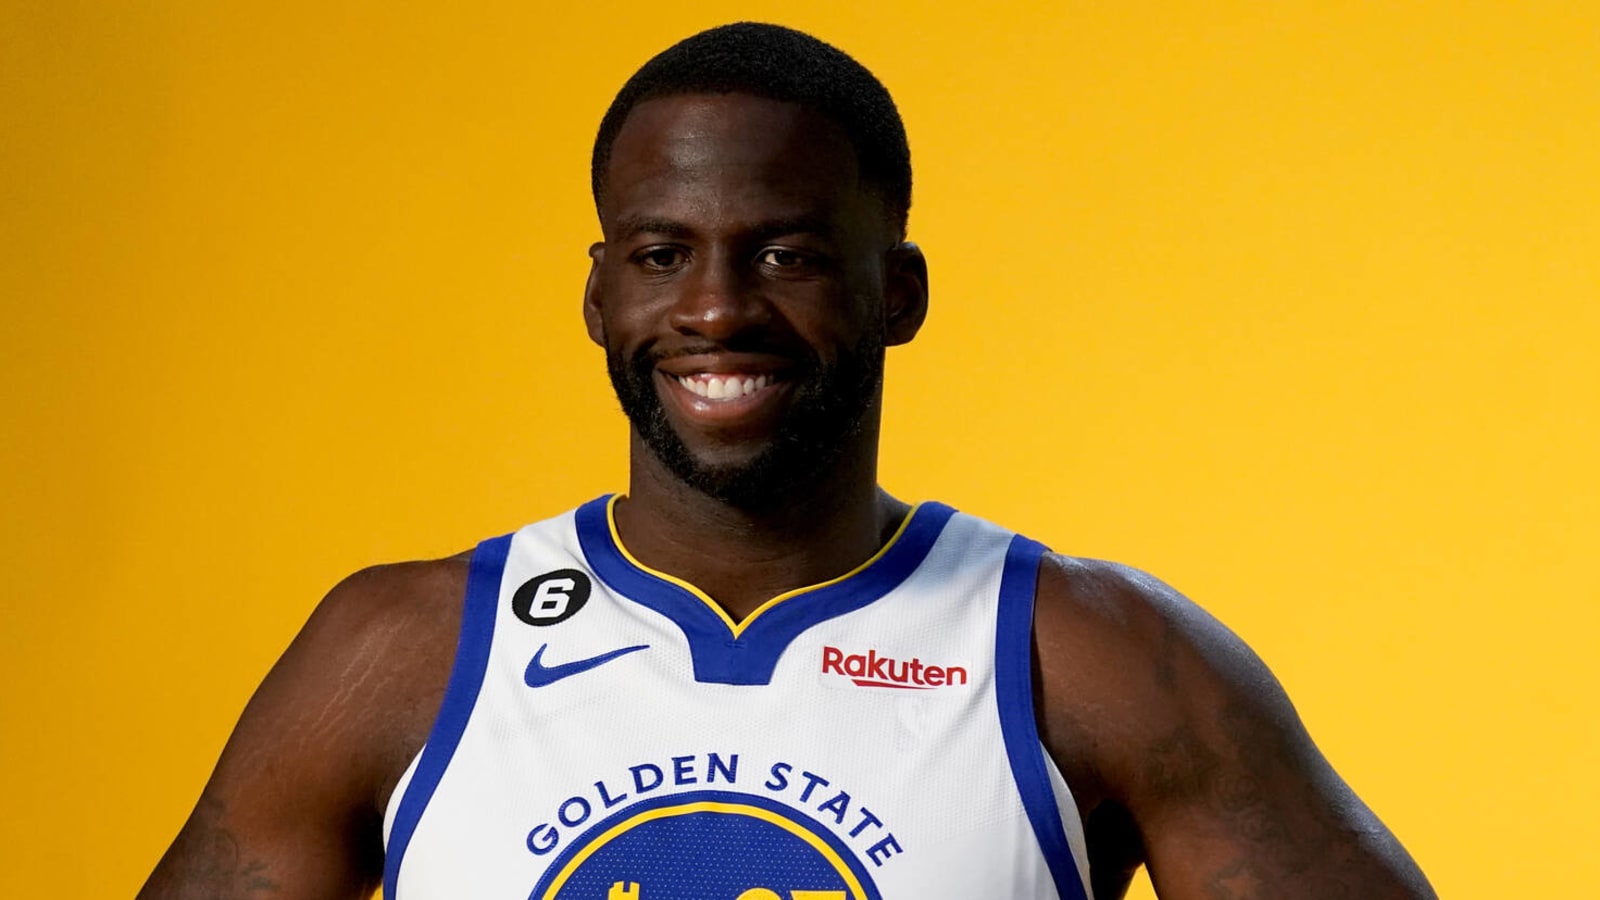 Stephen Jackson Says Draymond Green Needs To Make Things Right With Jordan Poole: "He Gotta Fix That Situation."